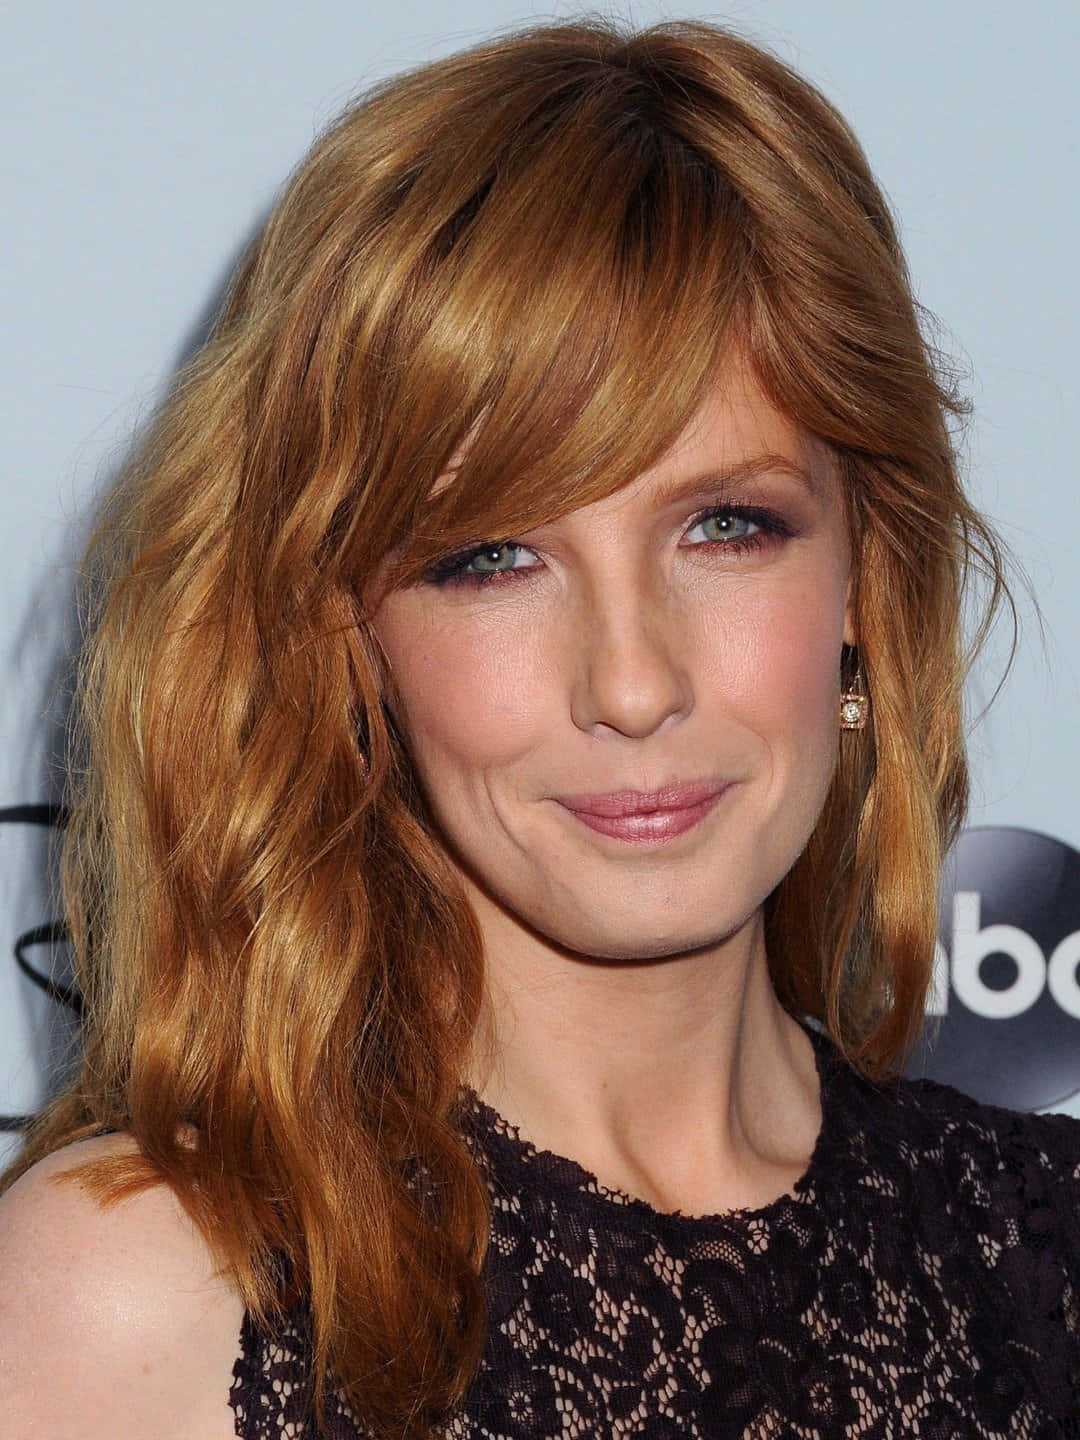 Kelly Reilly at the 2018 NBC Upfronts